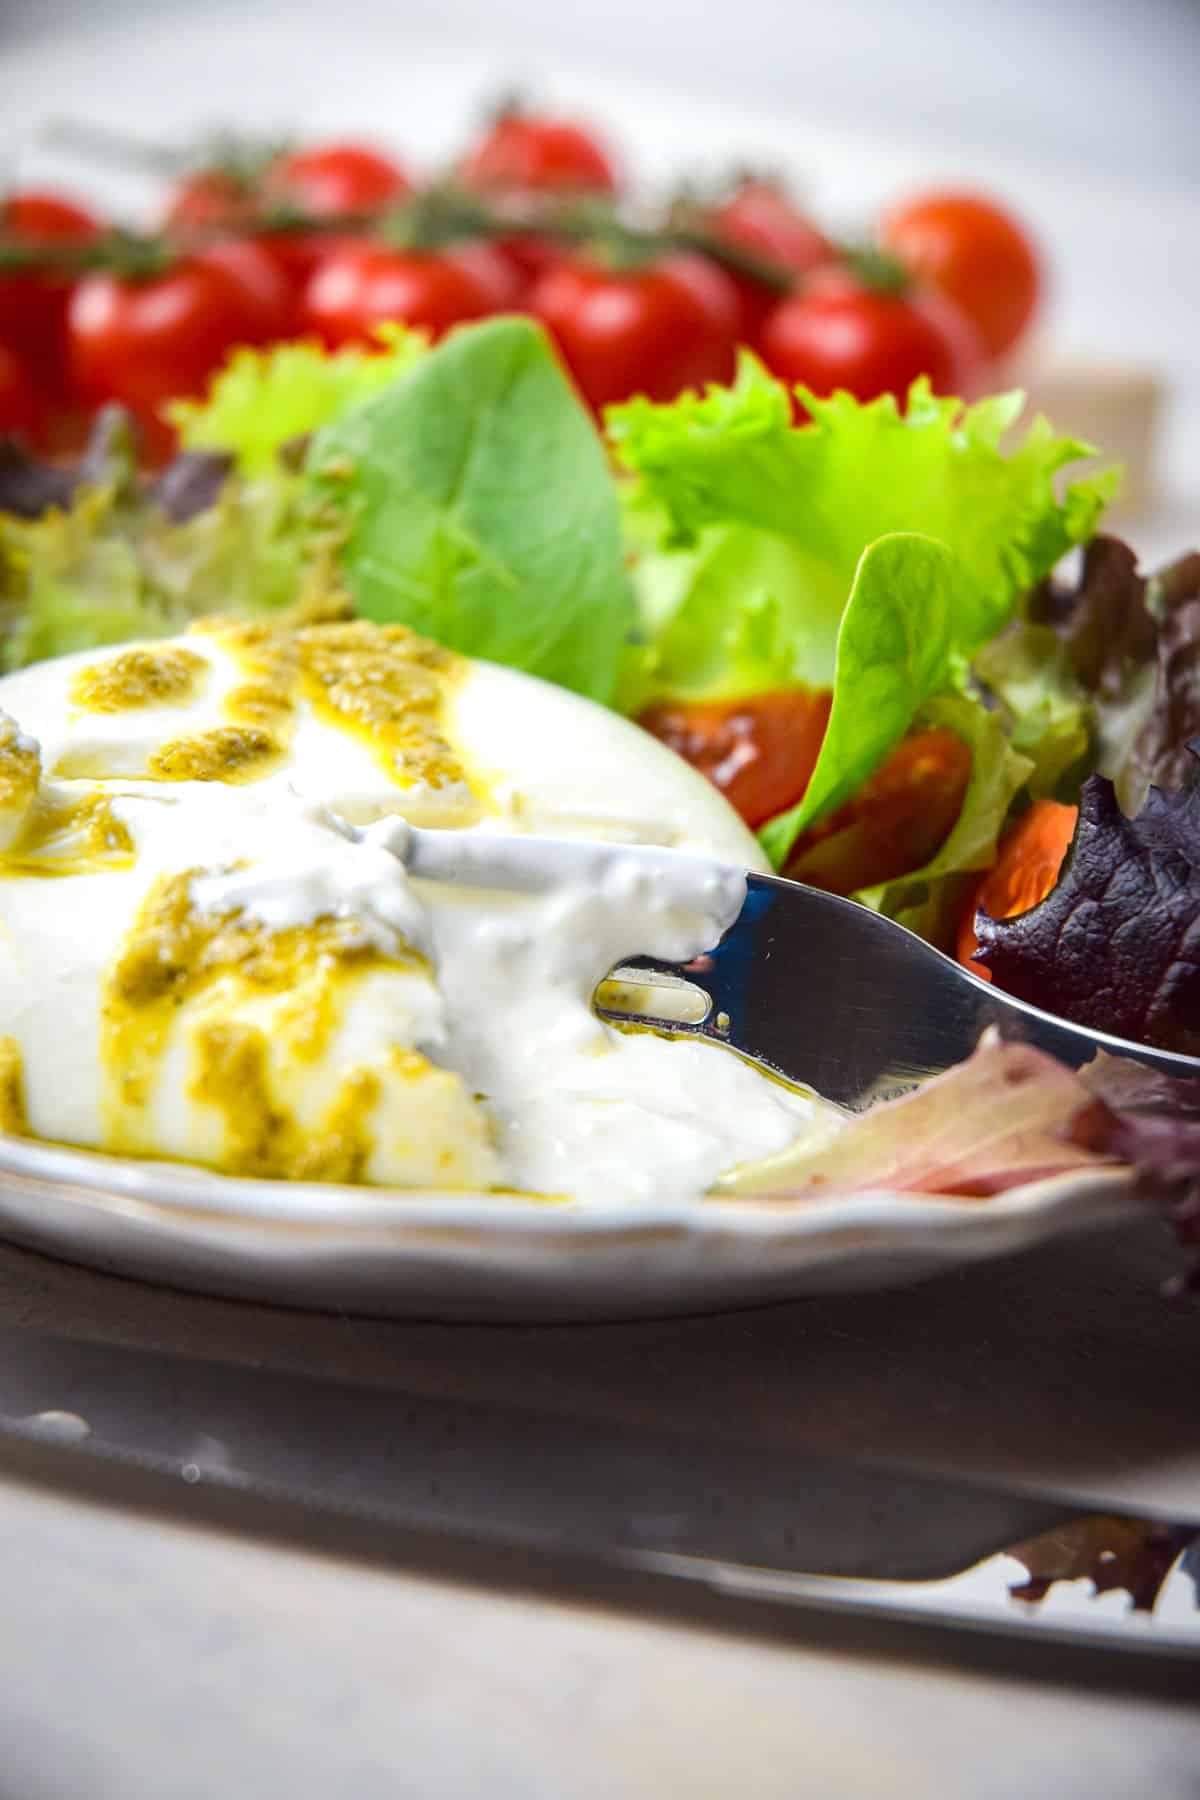 Burrata salad on a white plate with a fork, tomatoes in the background.